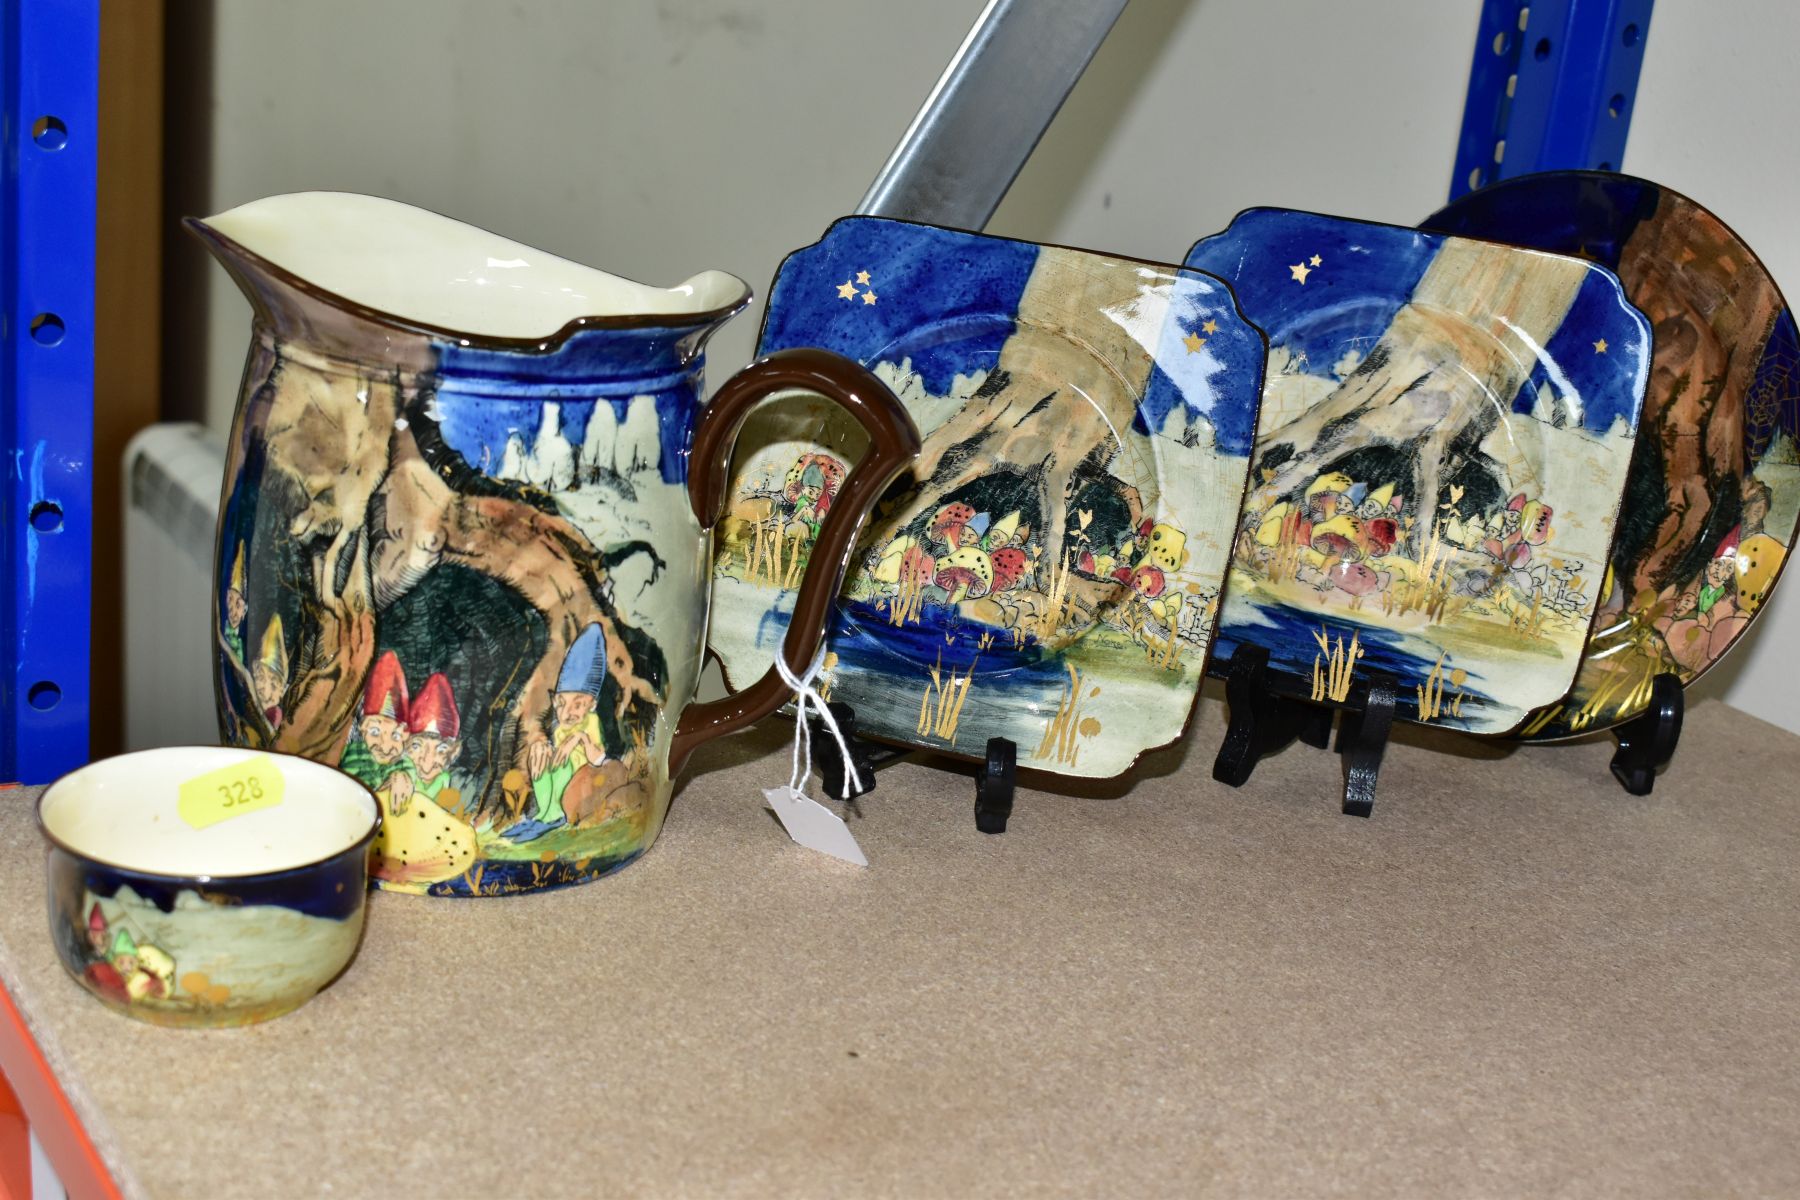 FIVE PIECES OF ROYAL DOULTON GNOMES B SERIES WARE, (also known as Munchkins designed by Charles